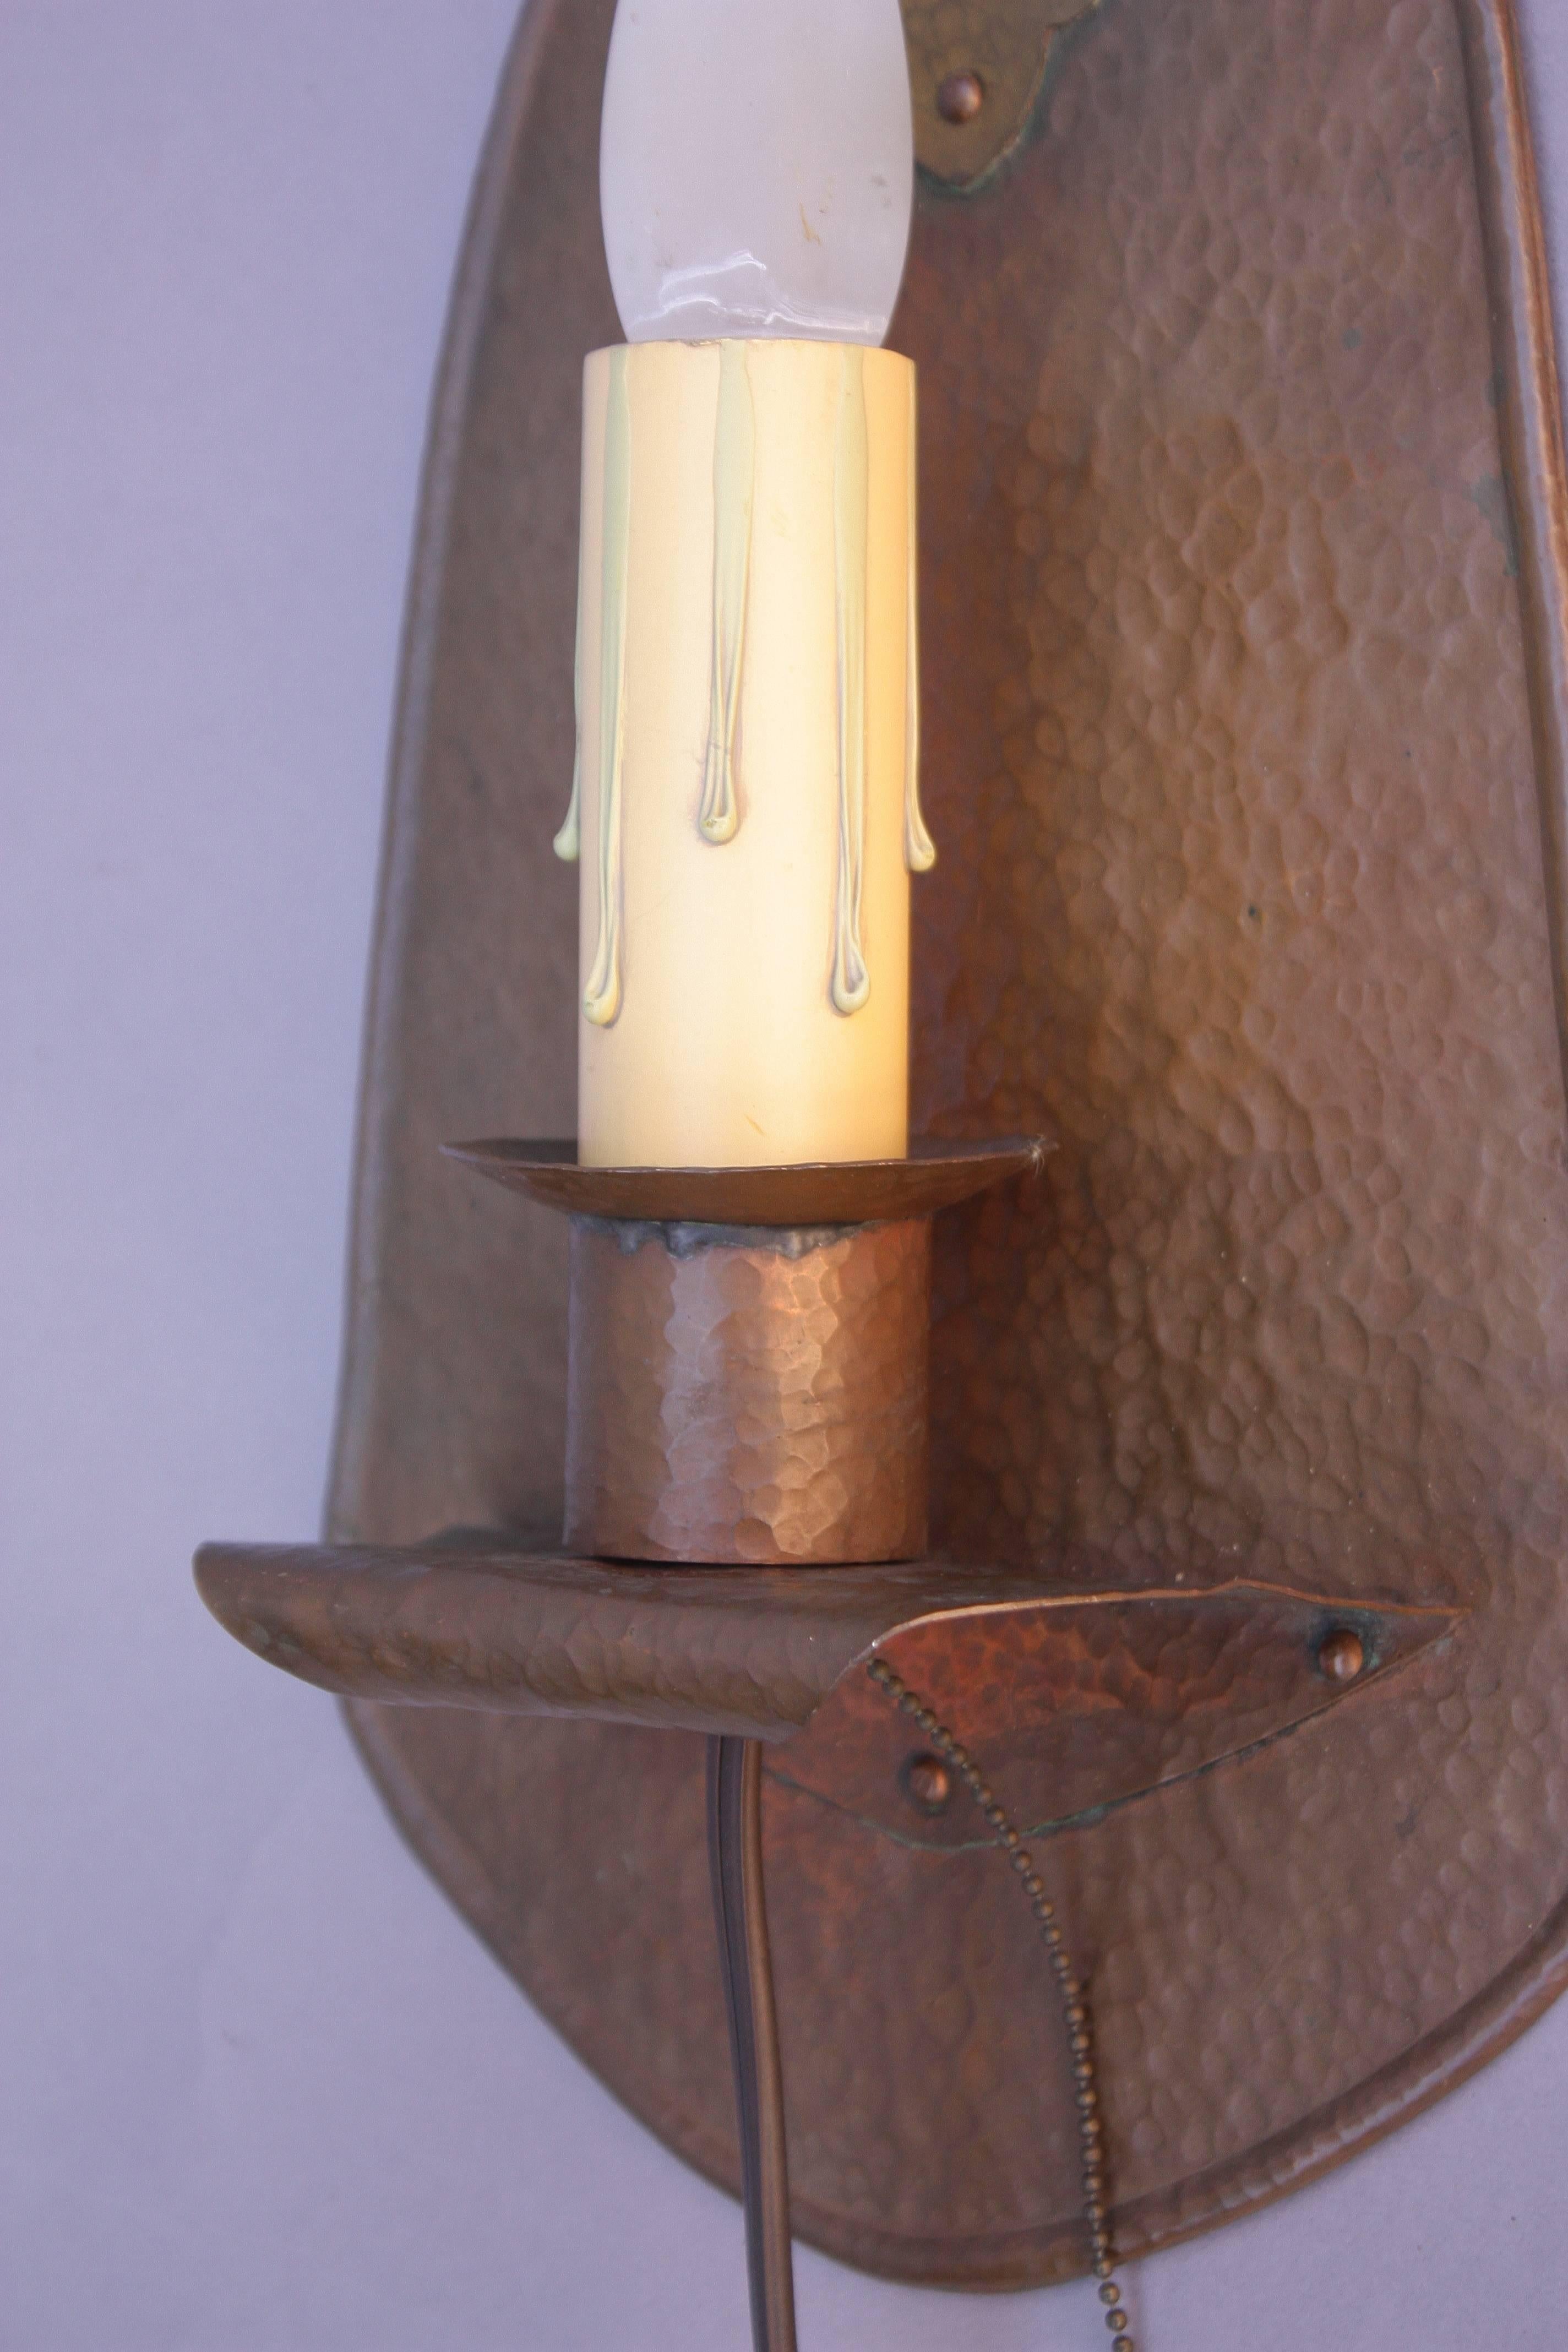 Single light hammered copper sconce from the turn of the century.